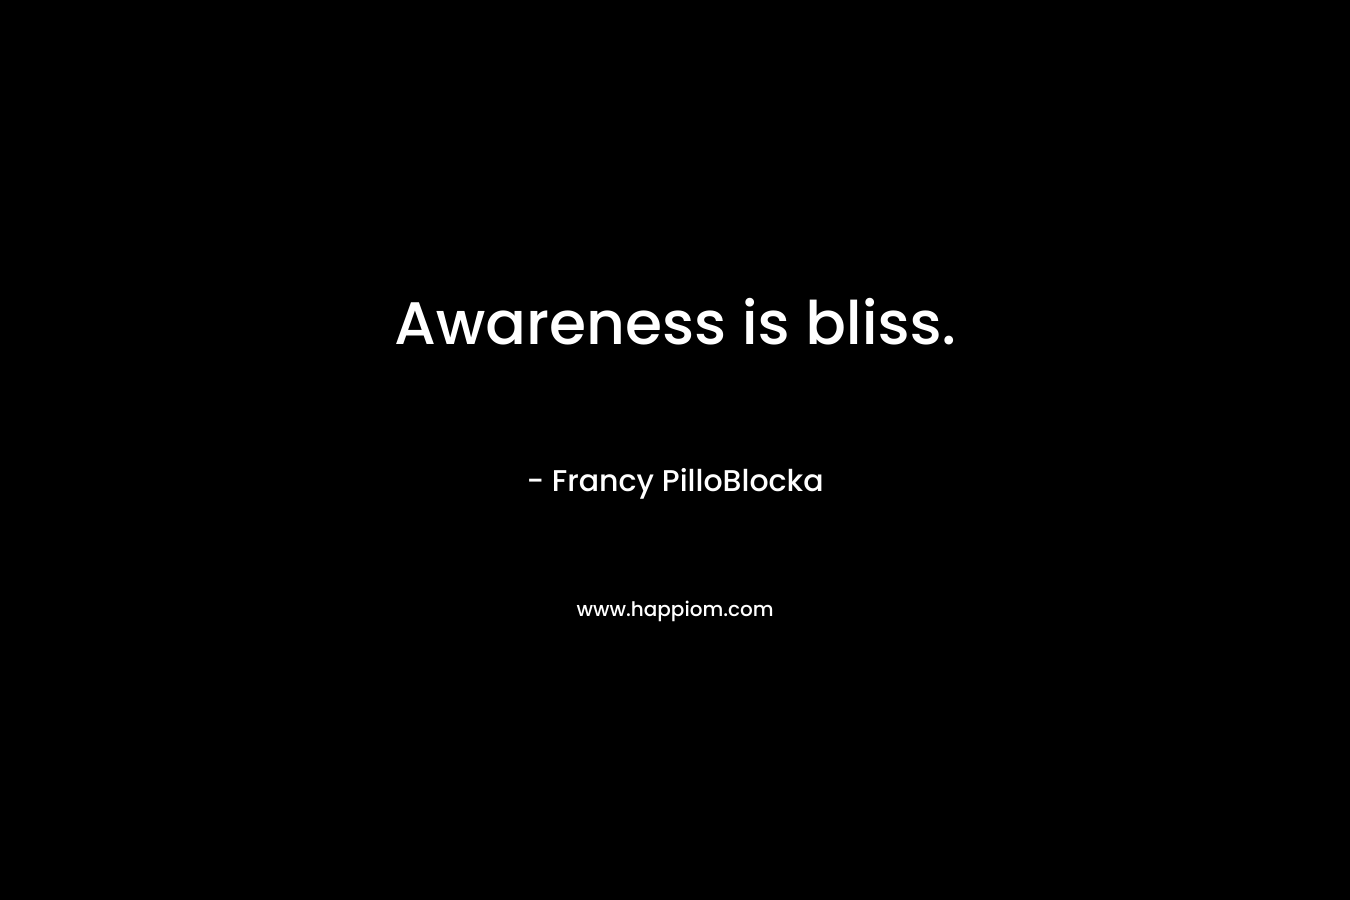 Awareness is bliss.